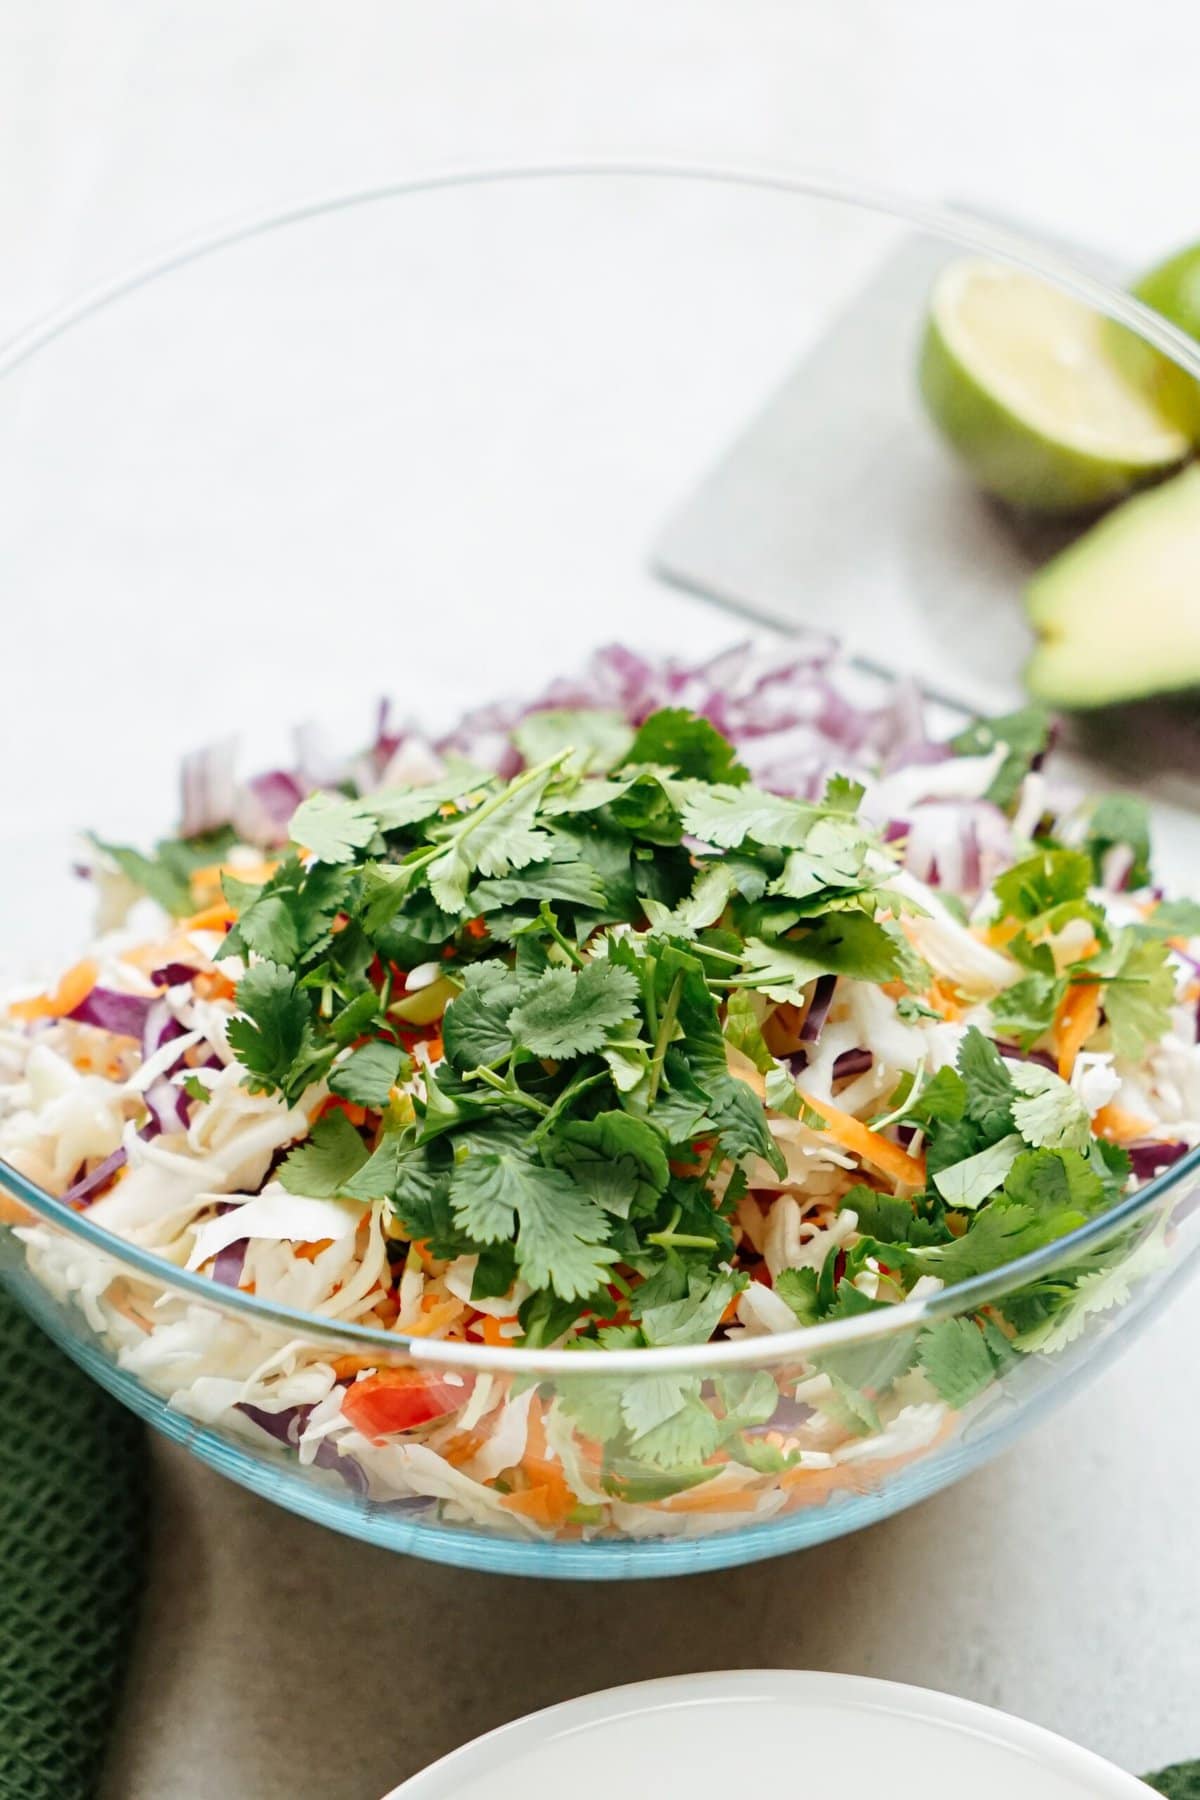 A fresh vegetable salad with cilantro garnish and fish tacos in a glass bowl.